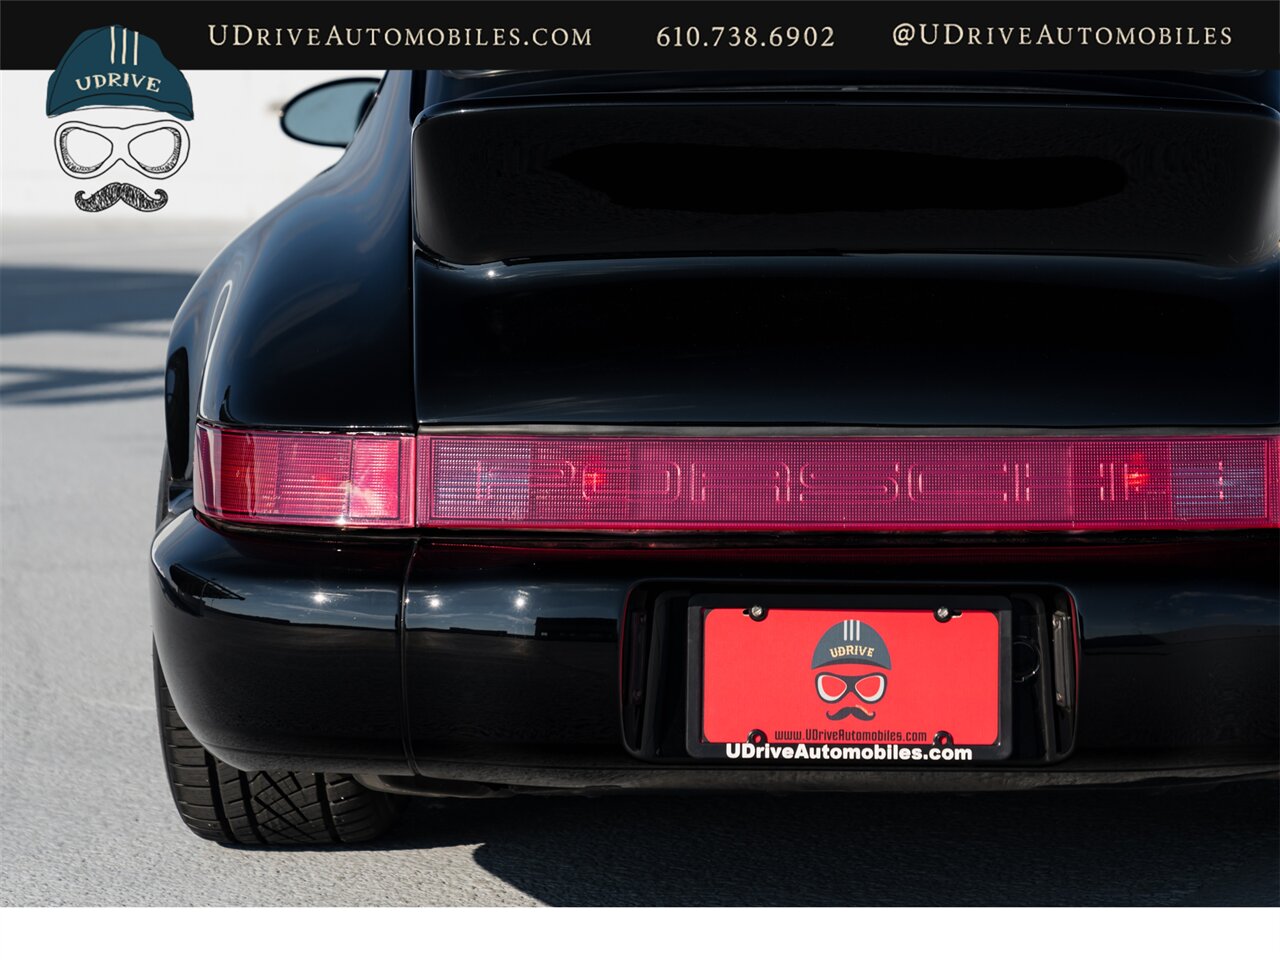 1989 Porsche 911 C4  964 Carrera 4 C4 5 Speed Manual $33k in Recent Service History - Photo 23 - West Chester, PA 19382